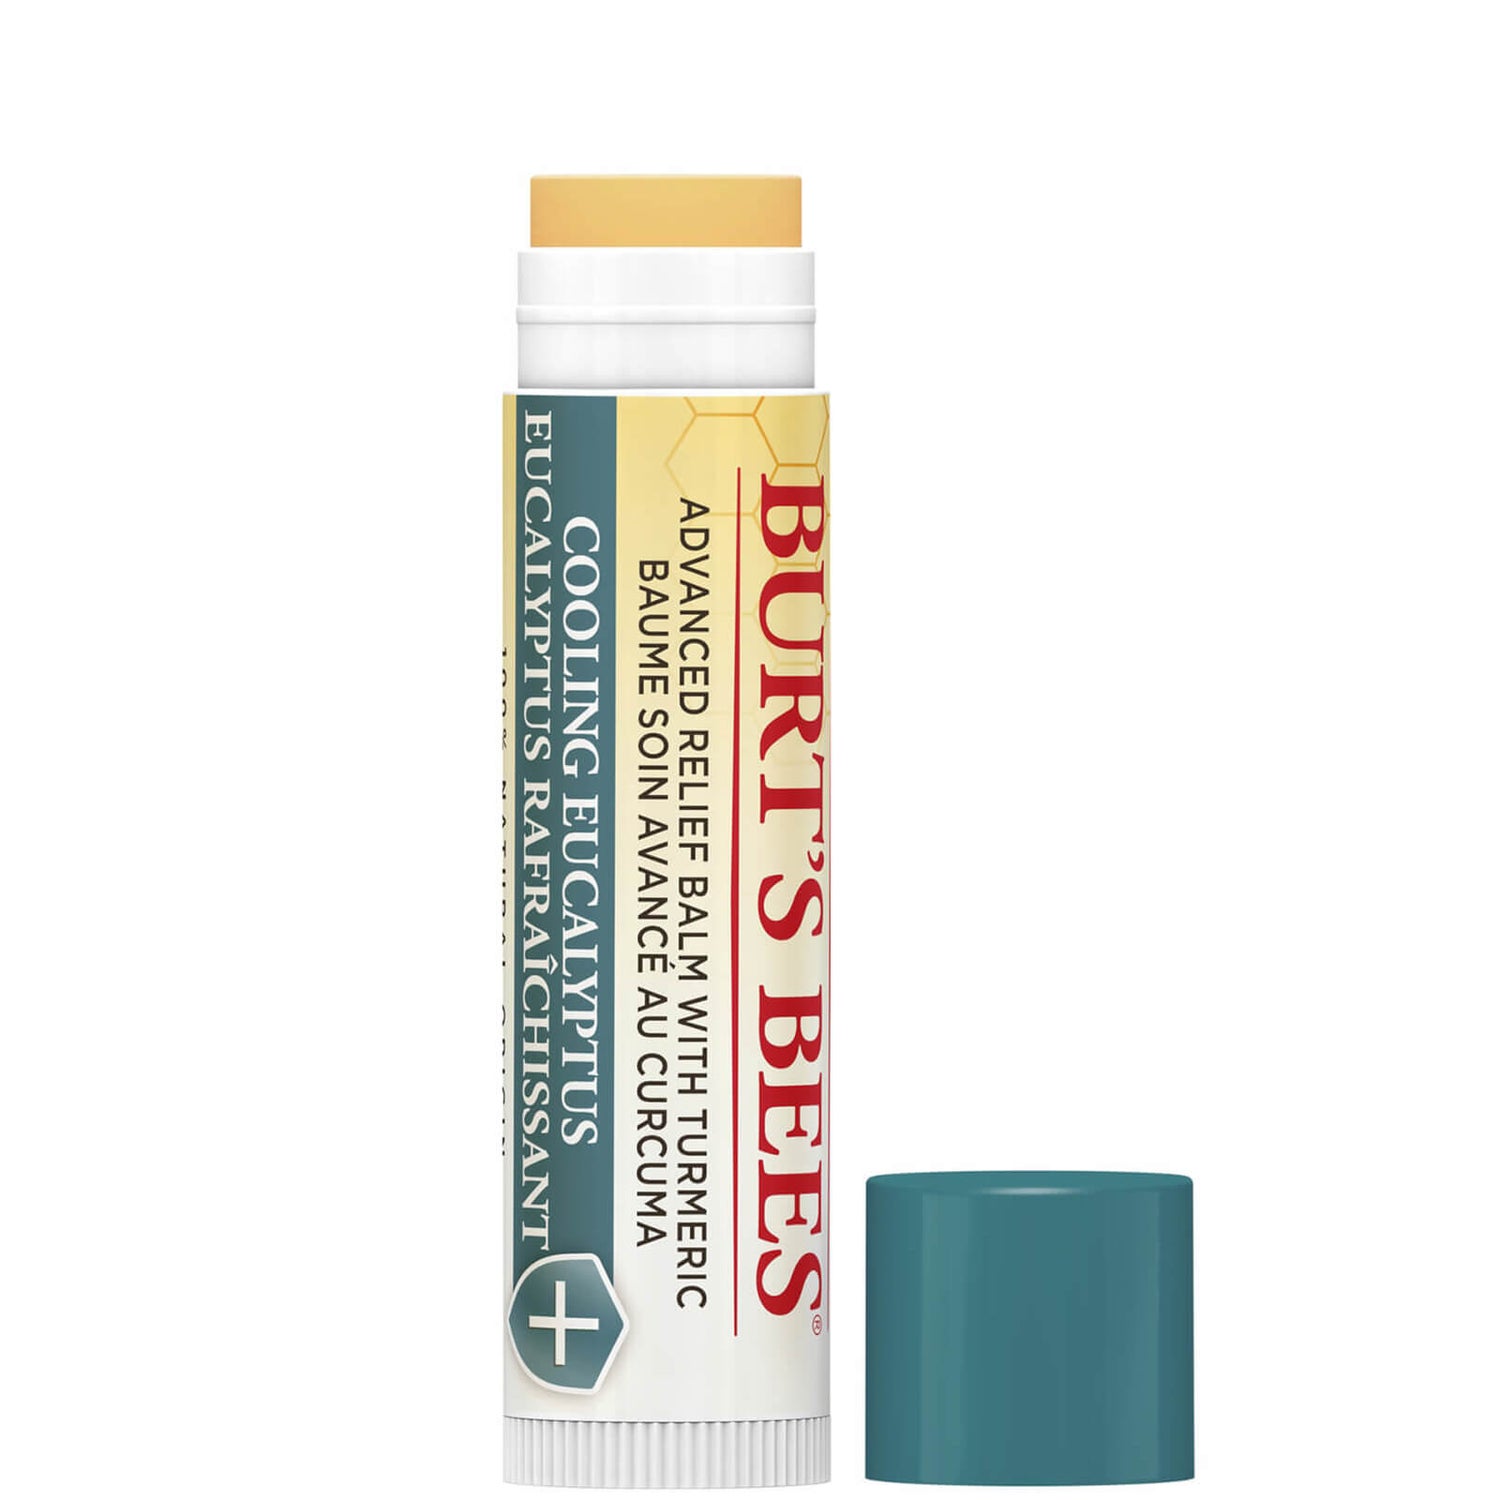 Burt's Bees 100% Natural Origin Advanced Relief Lip Balm For Extremely Dry Lips, Cooling Eucalyptus